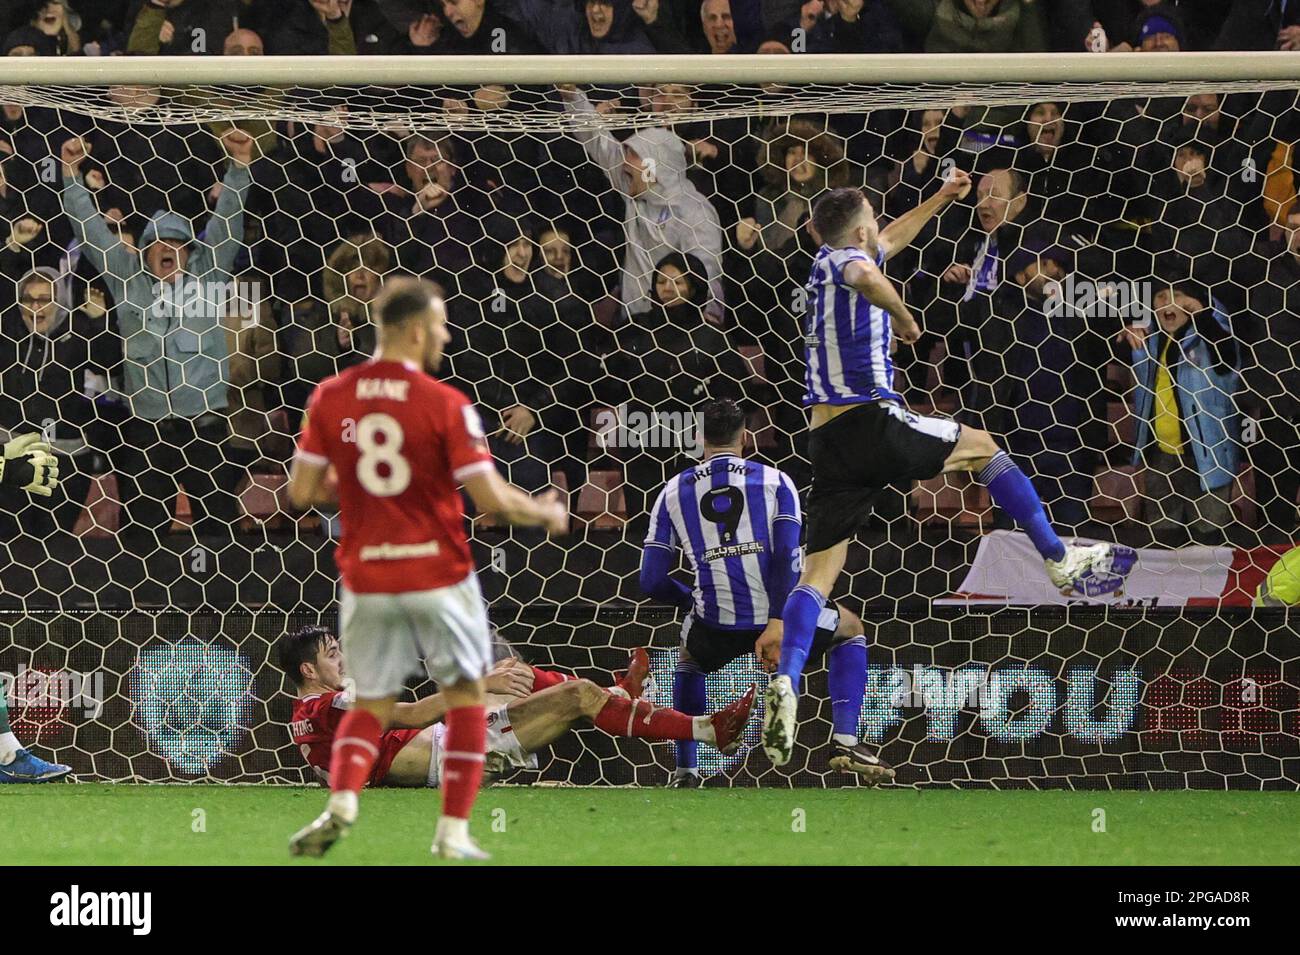 Lee Gregory #9 of Sheffield Wednesday scores to make it 2-2 during the Sky Bet League 1 match Barnsley vs Sheffield Wednesday at Oakwell, Barnsley, United Kingdom, 21st March 2023  (Photo by Mark Cosgrove/News Images) Stock Photo